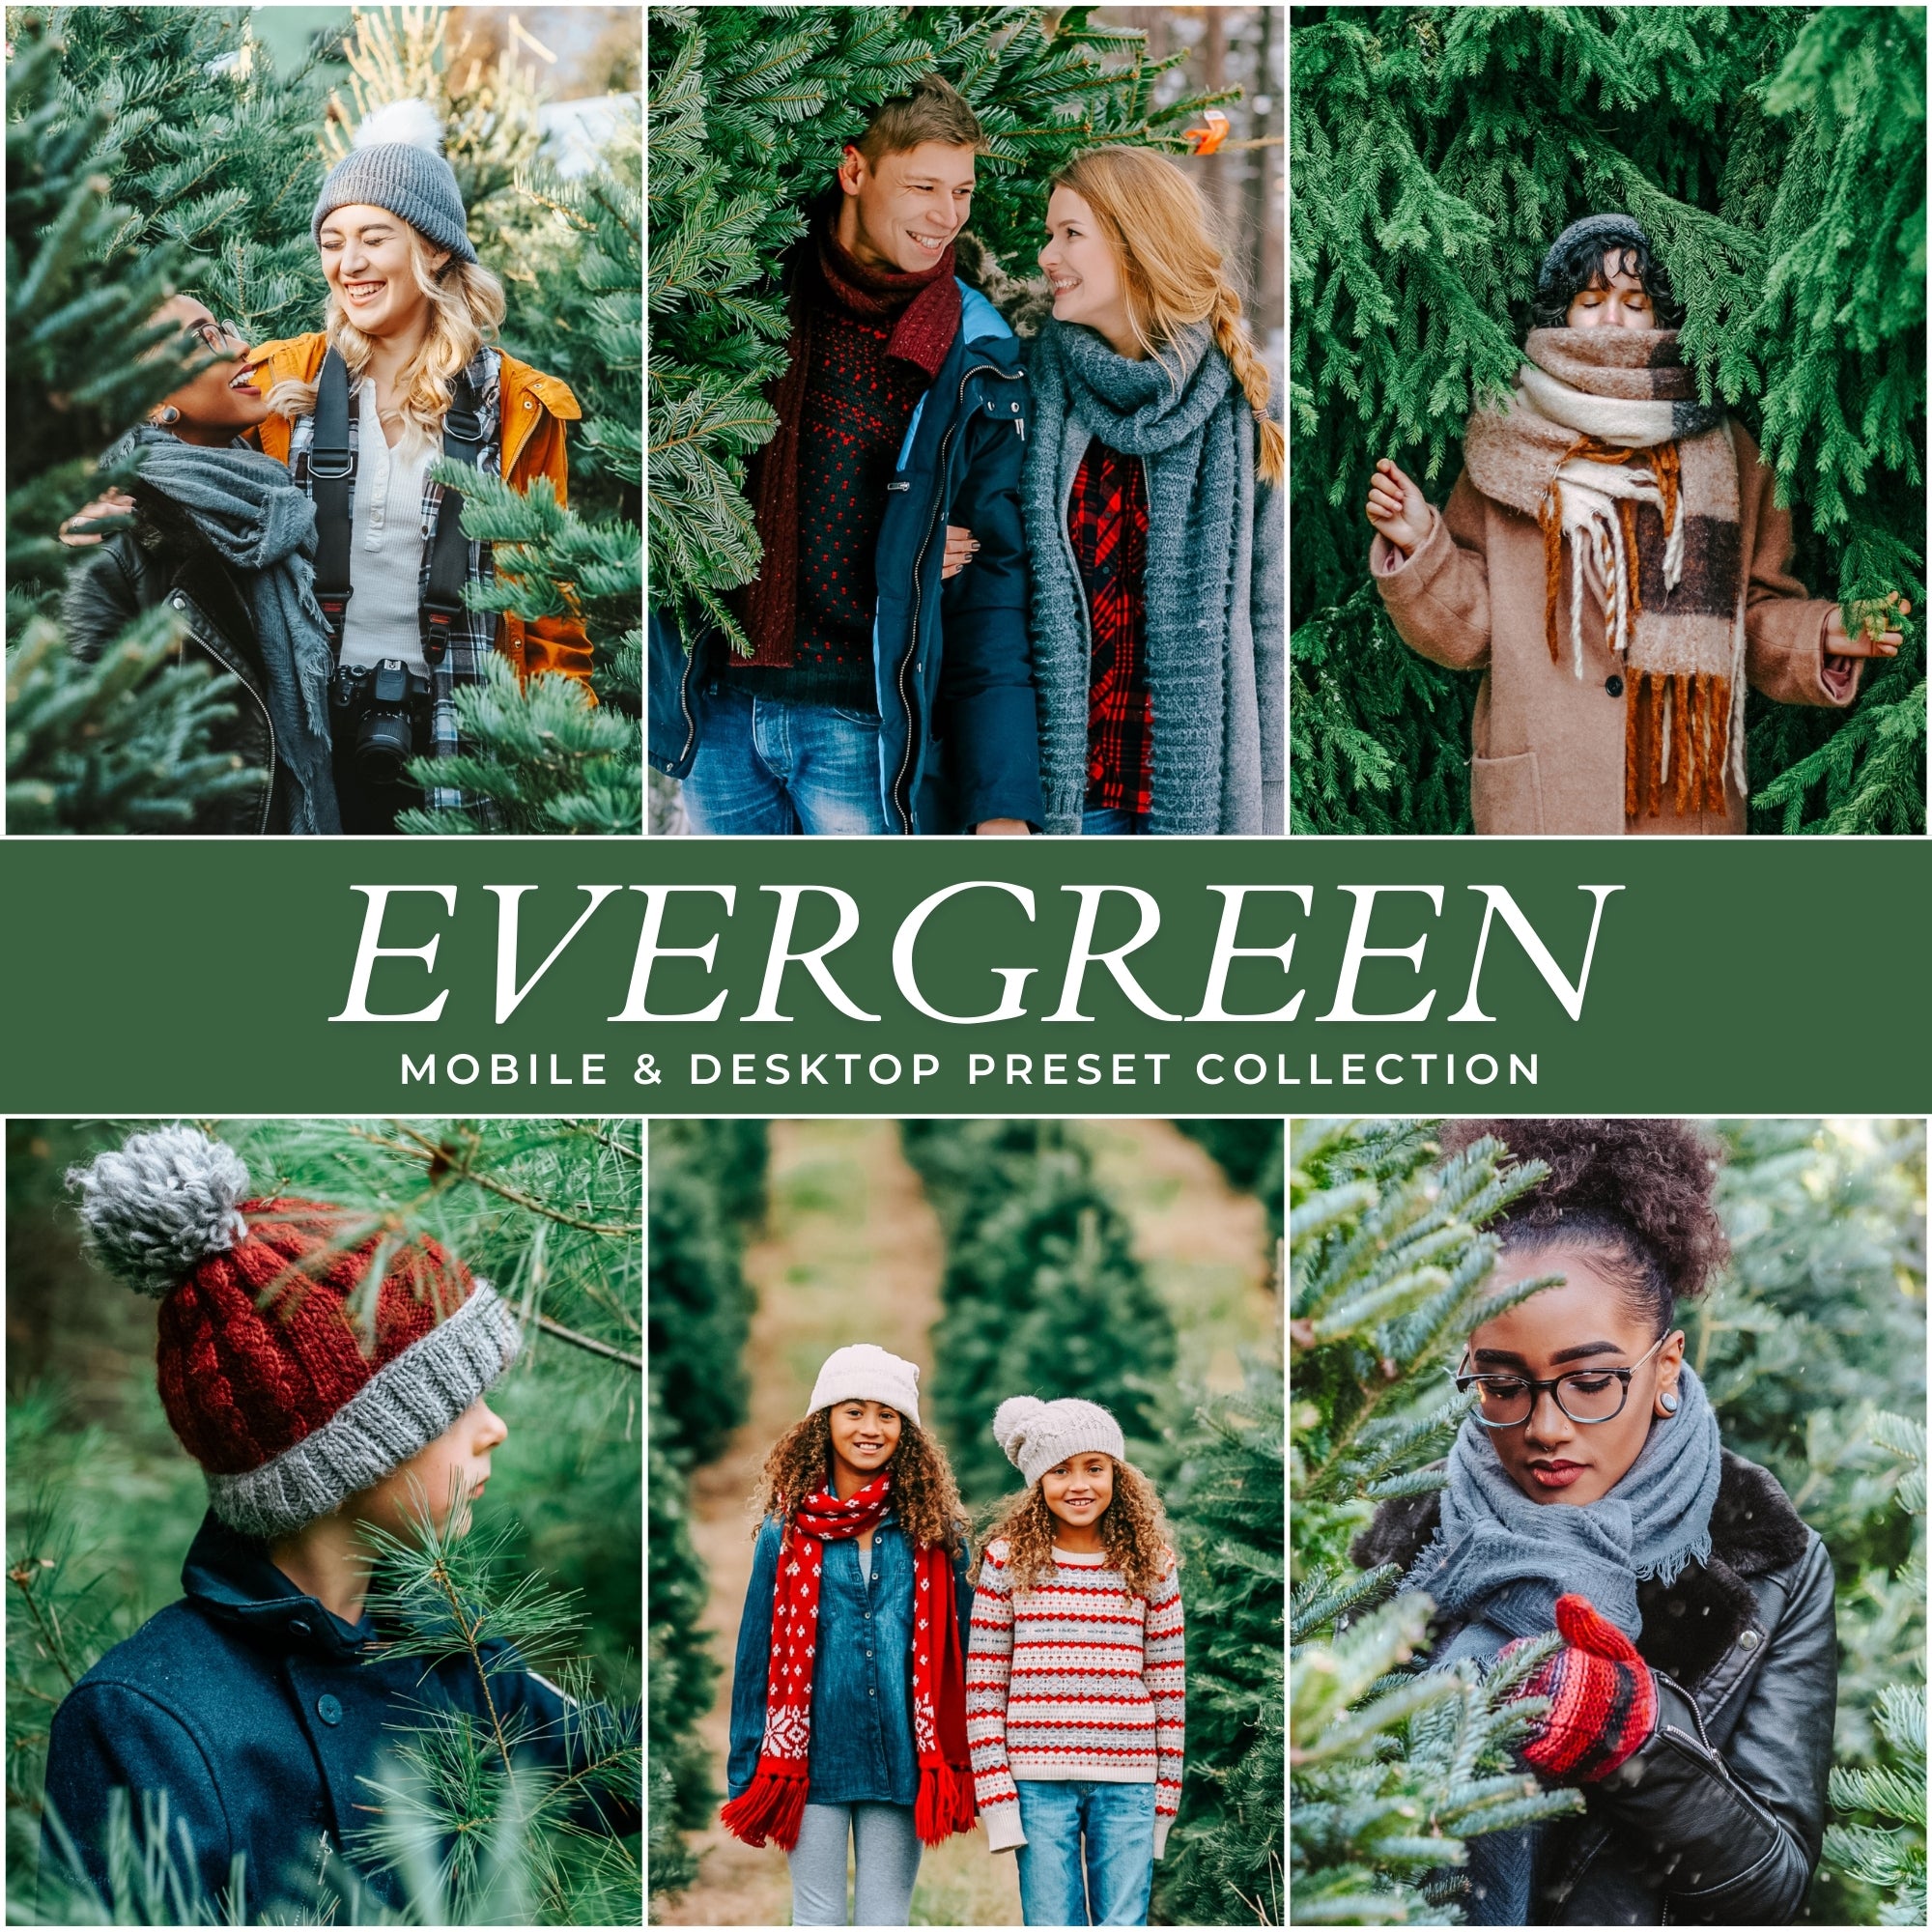 Mobile Christmas Lightroom Presets The Best Photo Editing Preset Filters For Christmas And Winter Holiday Photos with Adobe Lightroom Mobile And Desktop For Photographers and Instagram Influencers By Lou And Marks Presets